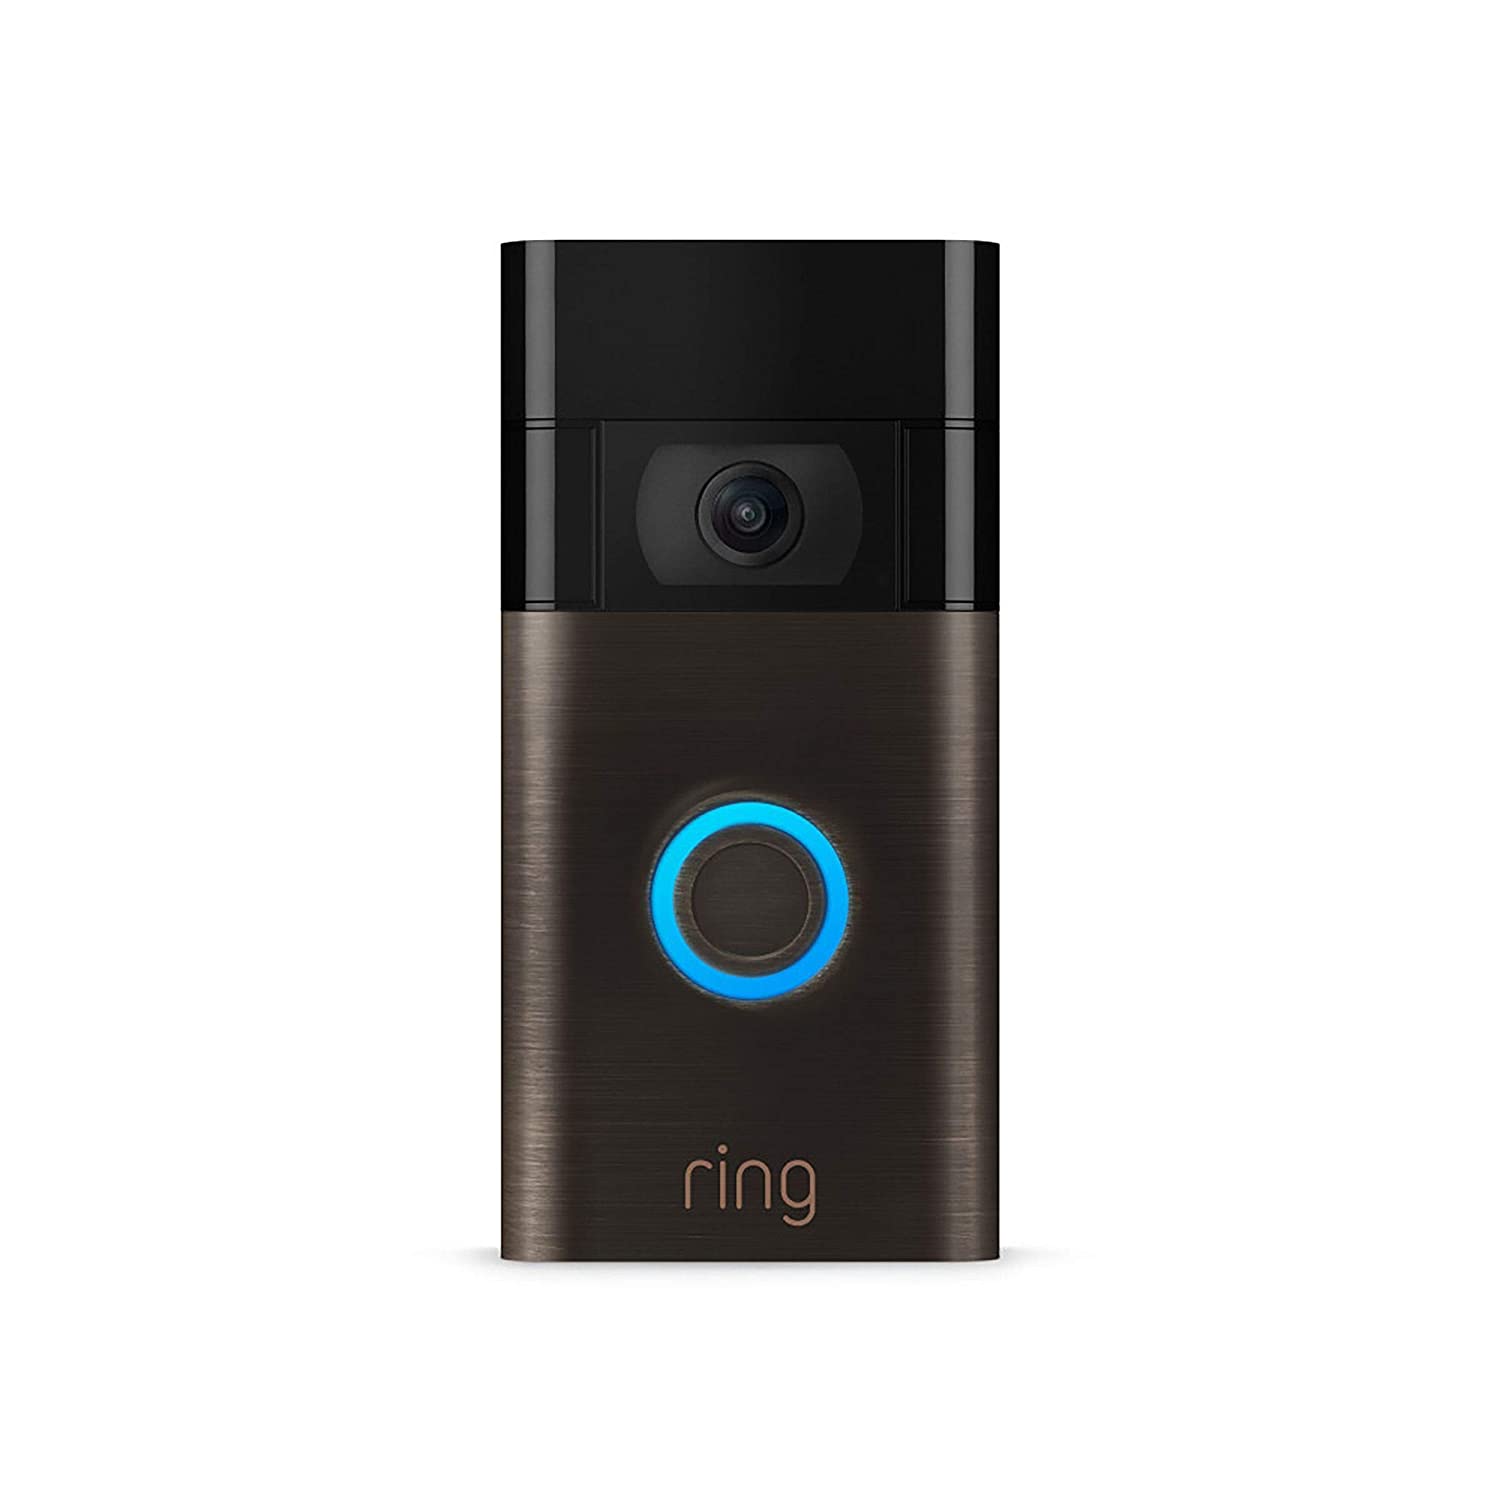 Ring Video Doorbell – 2020 release – 1080p HD video, improved motion detection, easy installation $74.99